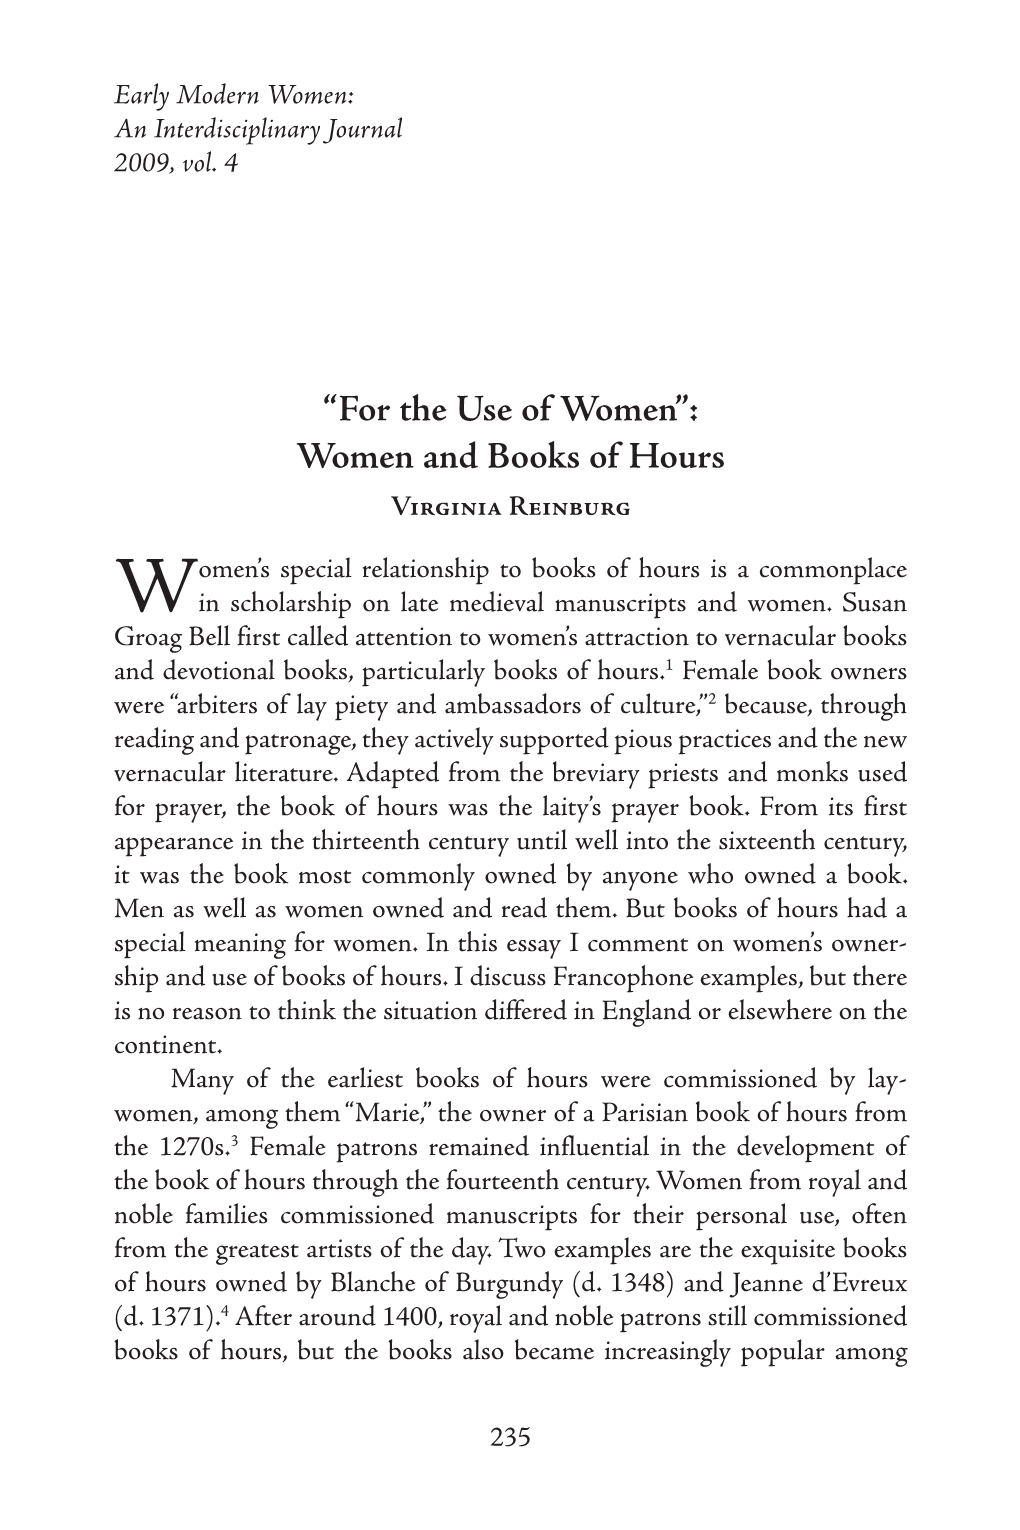 “For the Use of Women”: Women and Books of Hours Virginia Reinburg